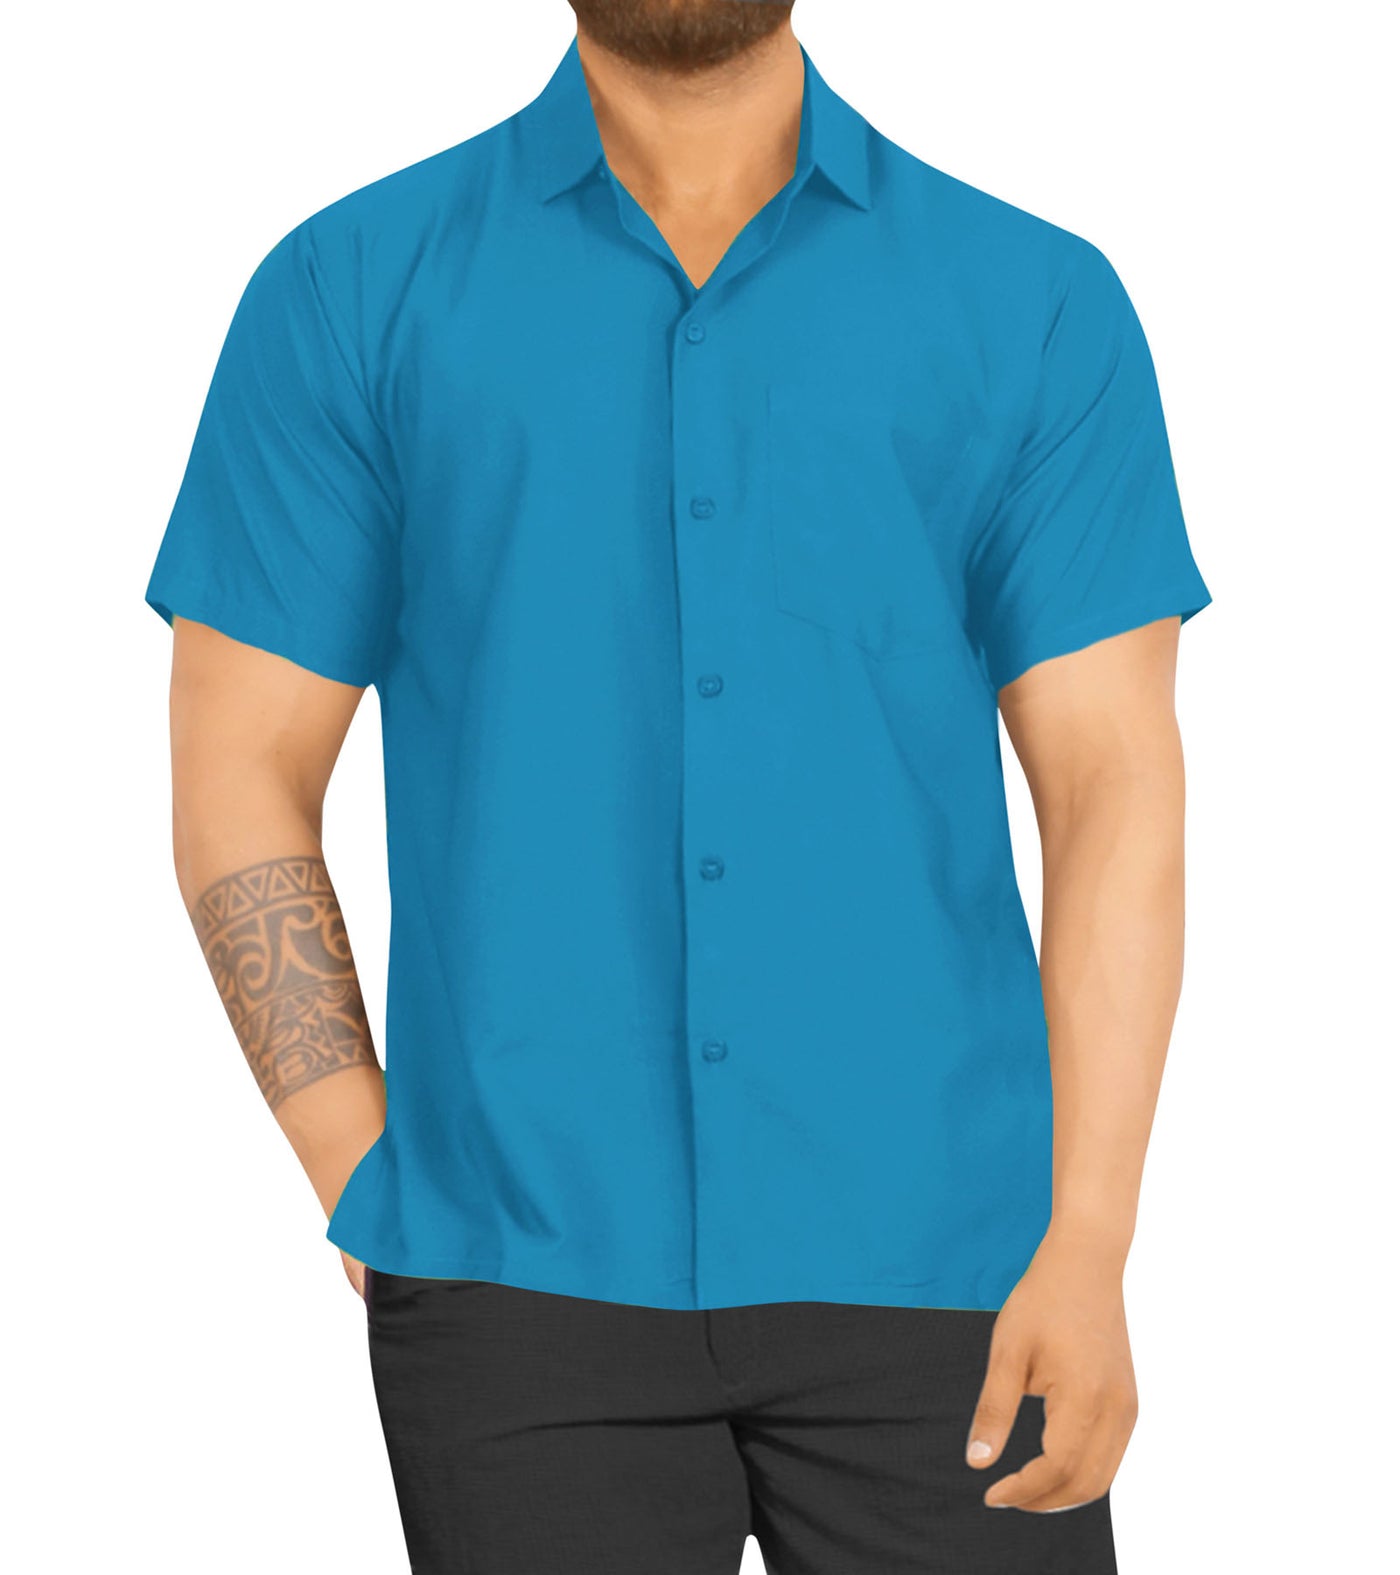 Teal Rayon Blend One pocket Casual Shirt for men